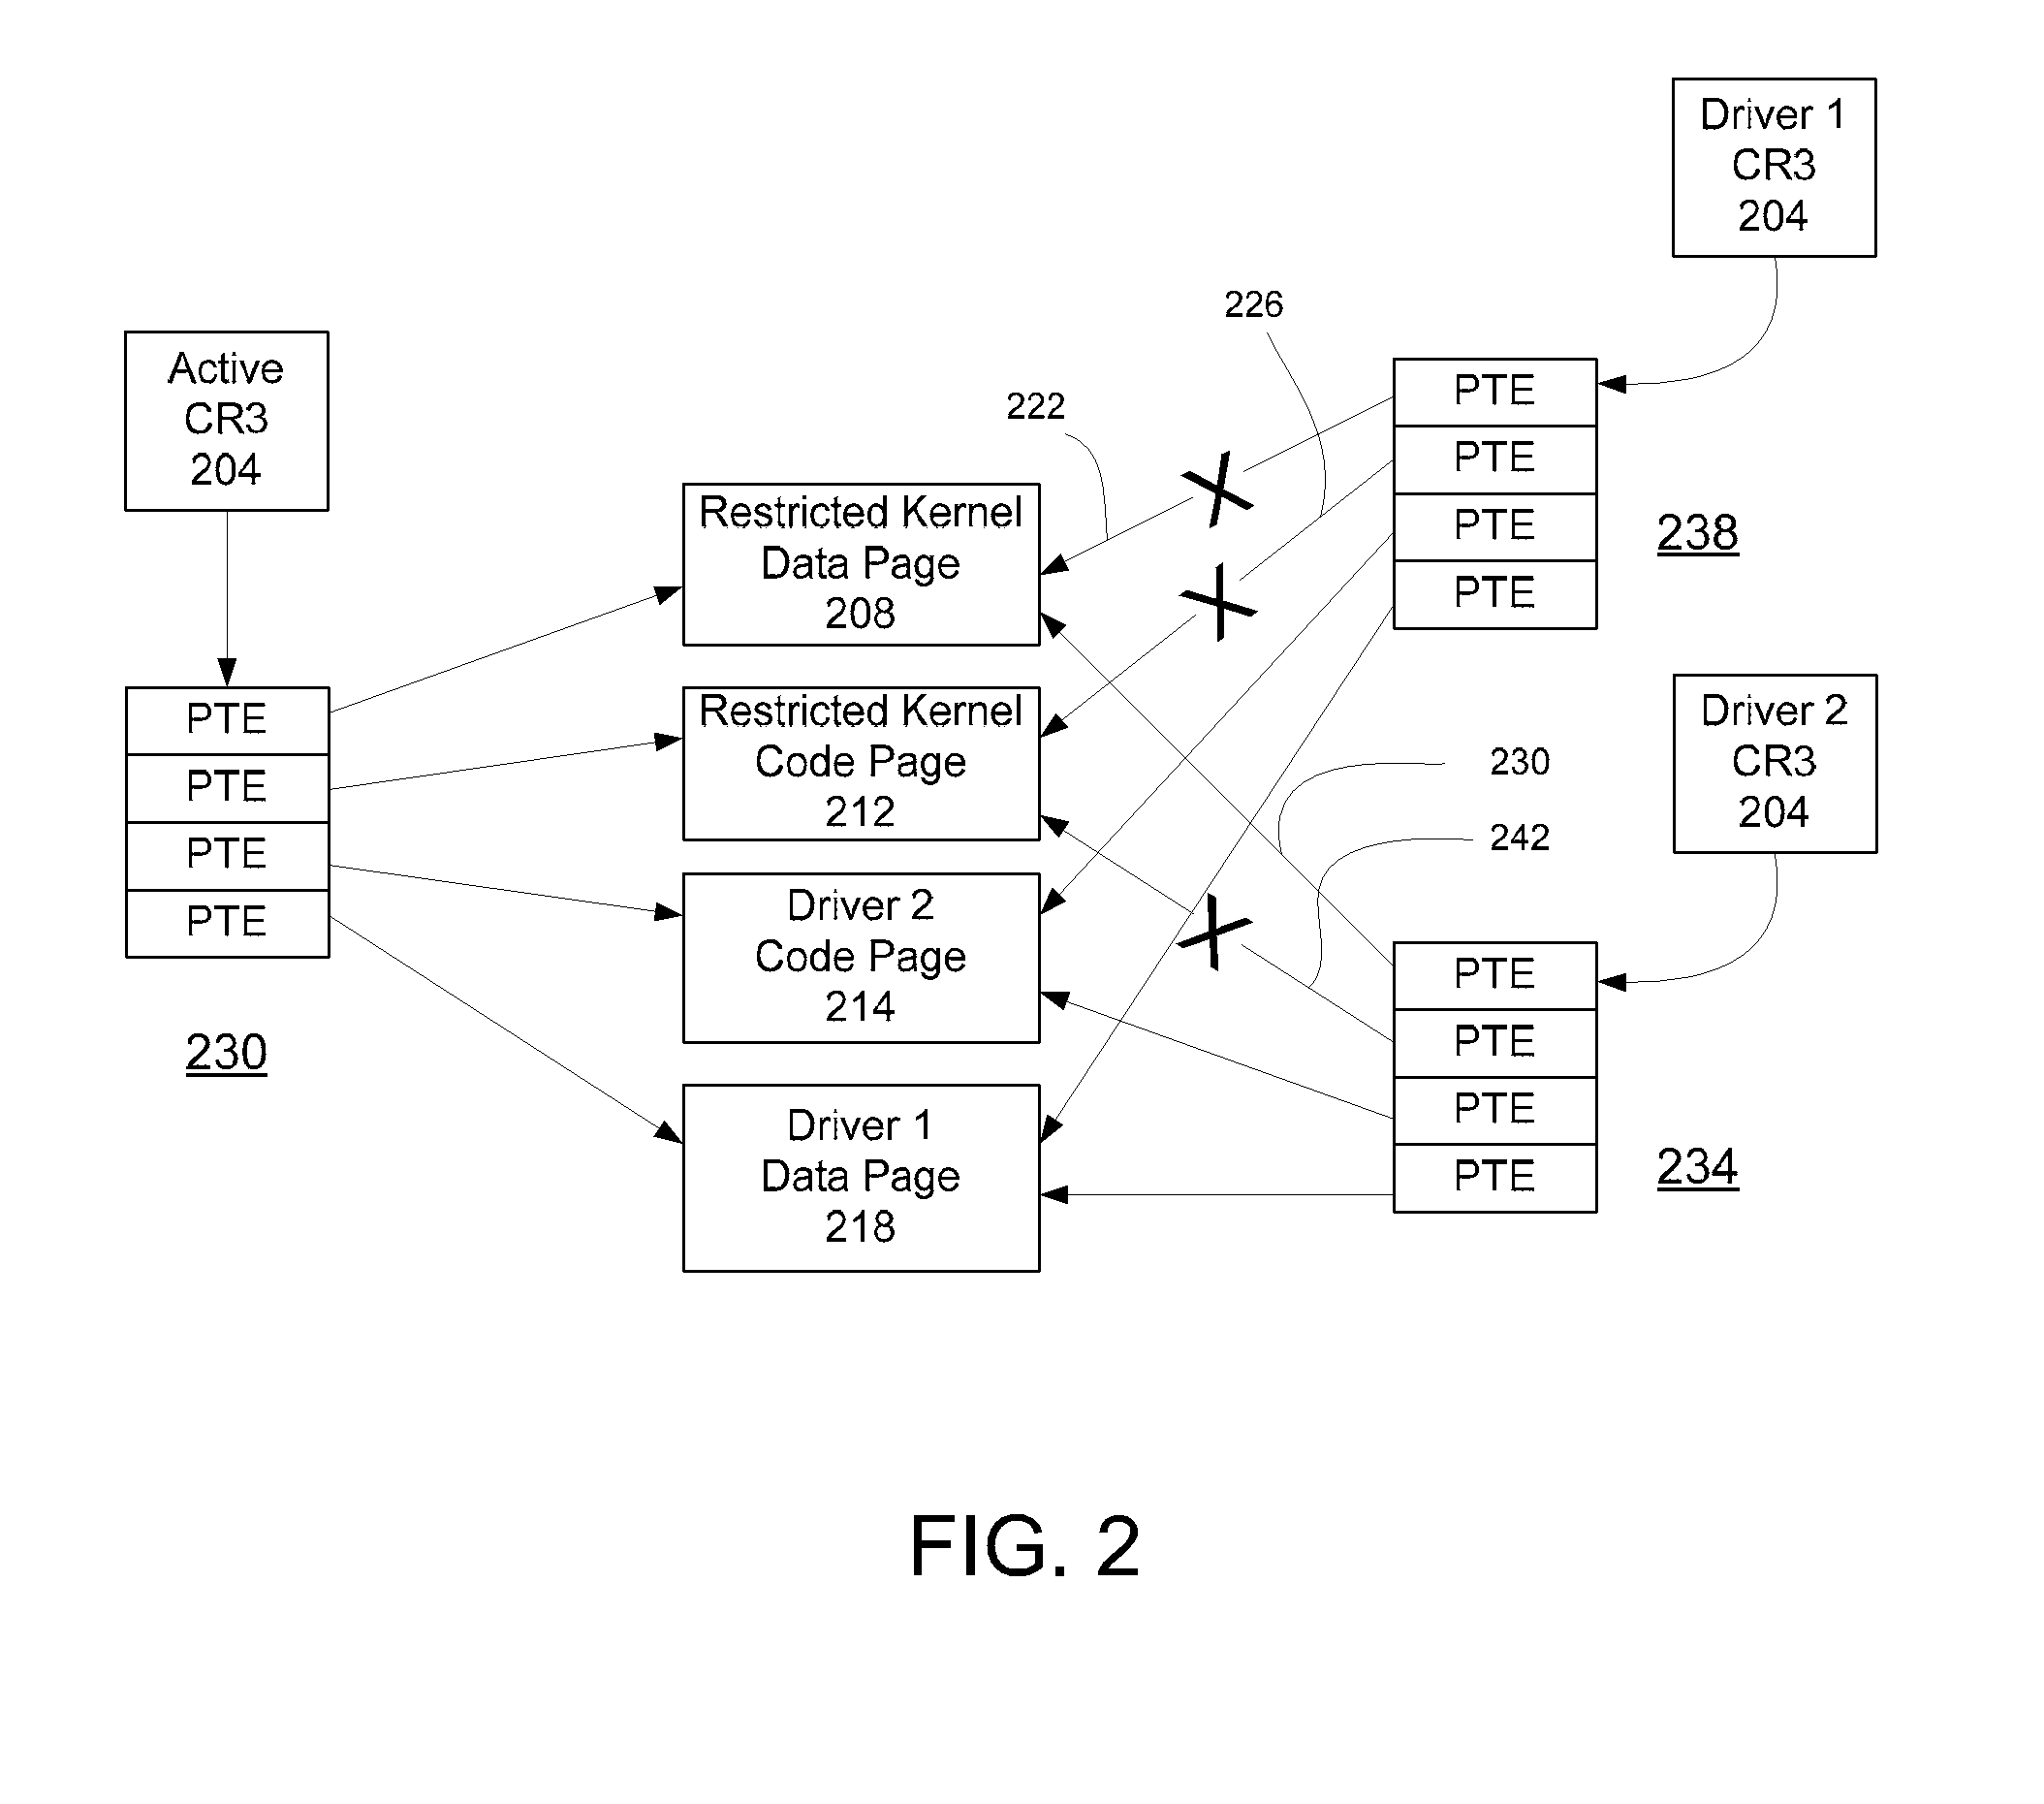 Restricted Component Access to Application Memory